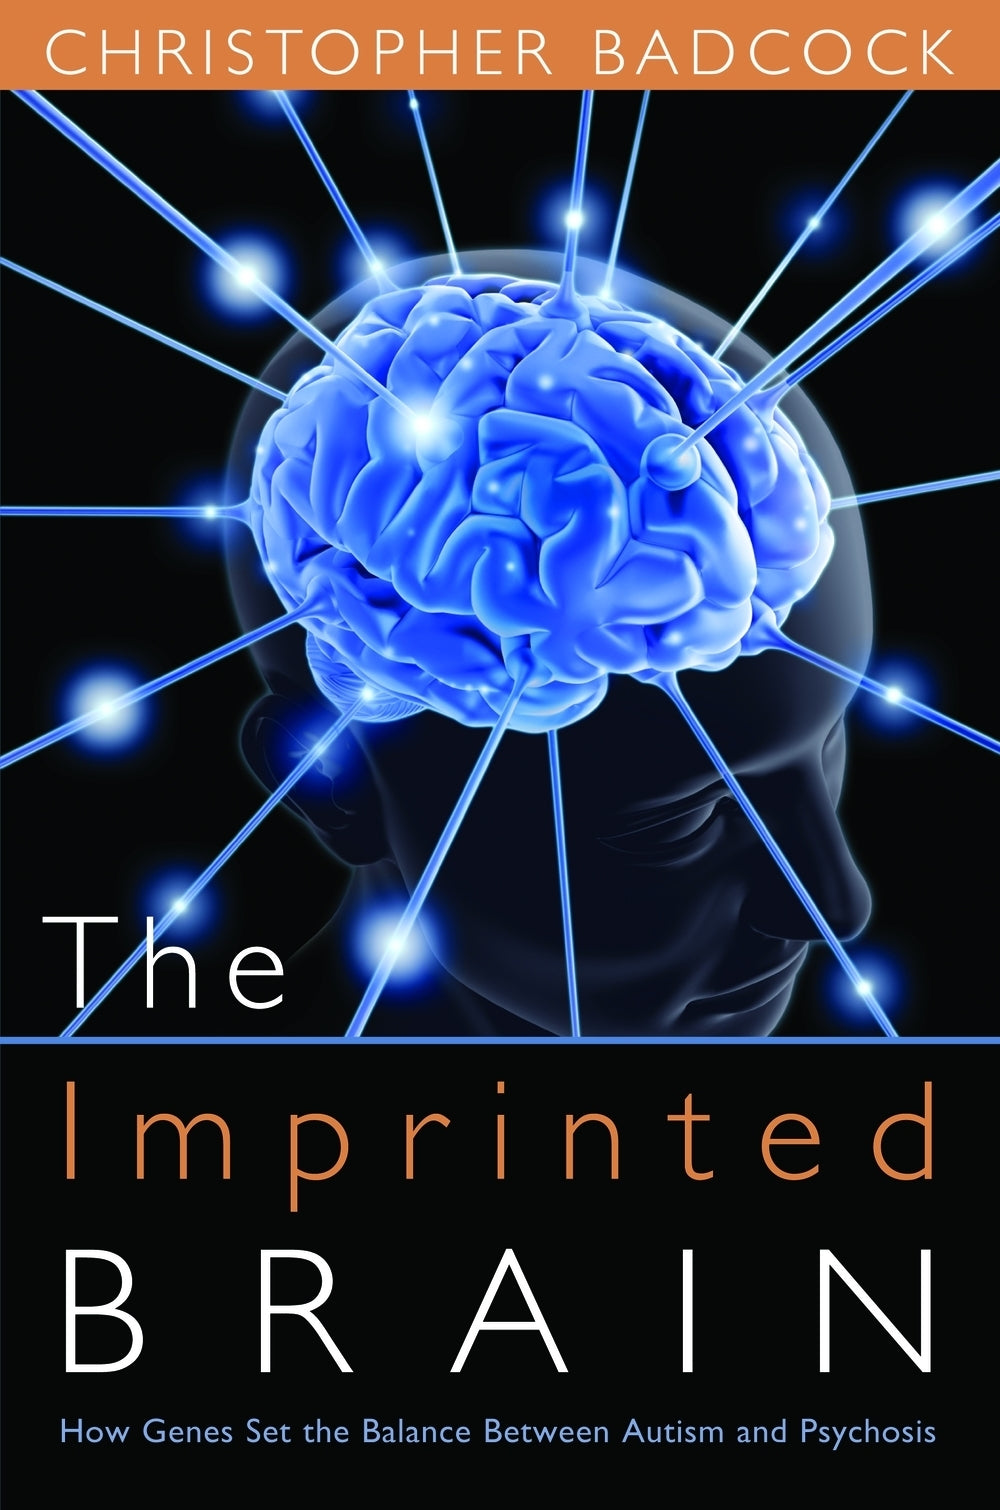 The Imprinted Brain by Christopher Badcock